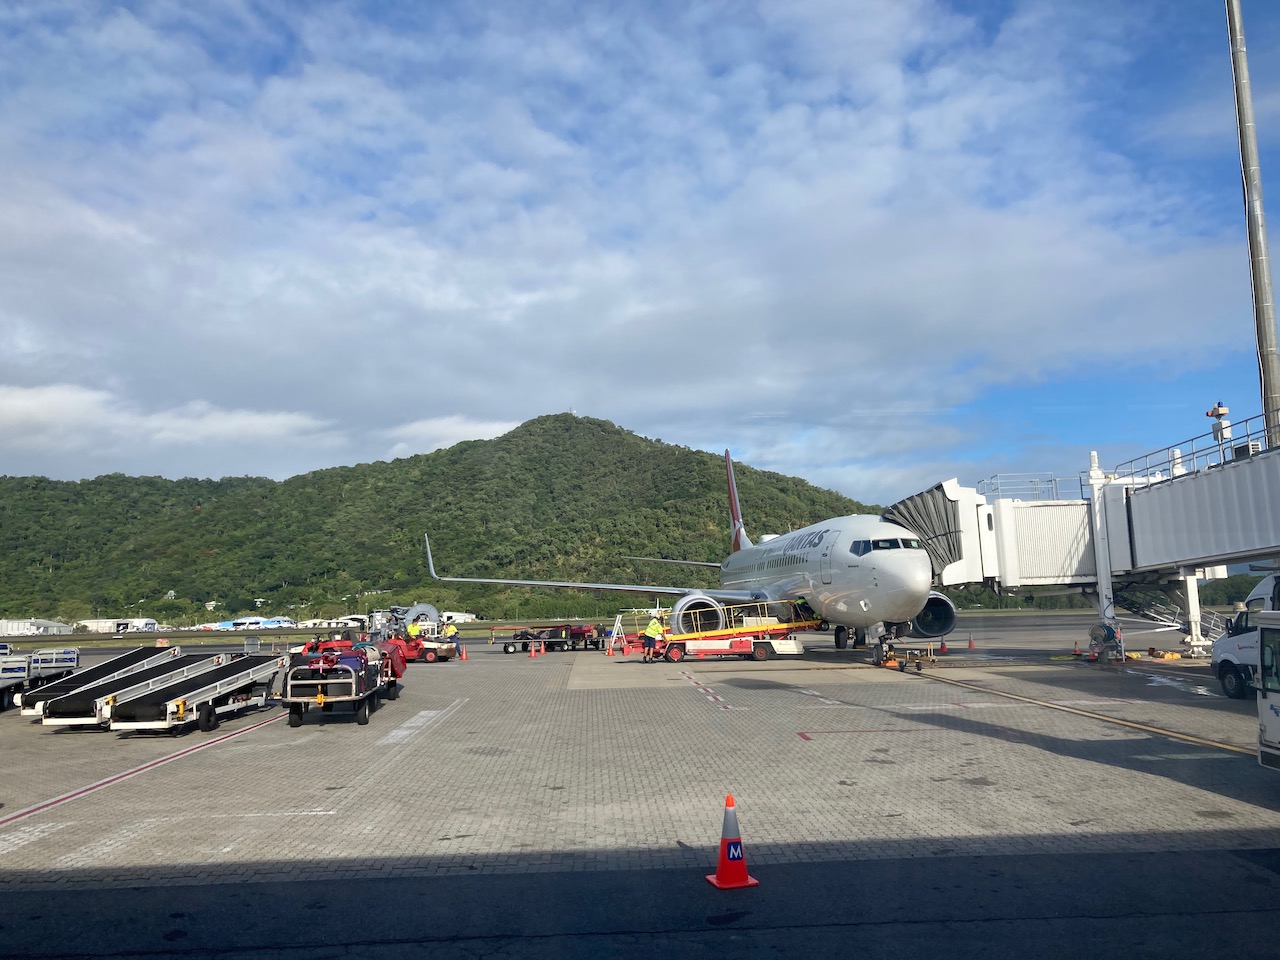 aeroplane parked at cairns airport set against mountains